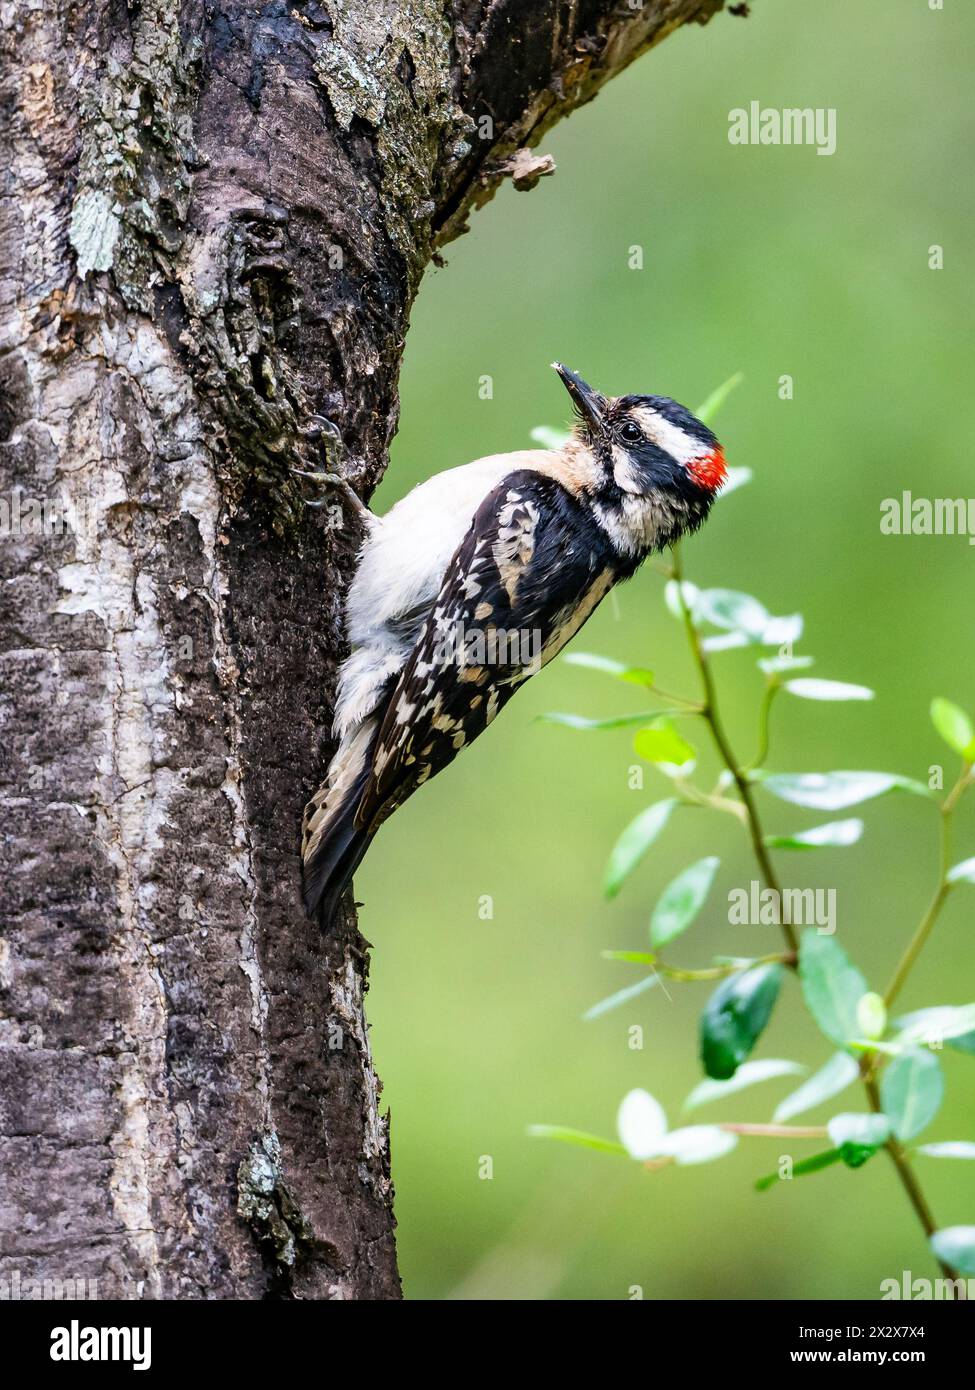 A male Downy Woodpecker (Dryobates pubescens) foraging on a tree trunk. Texas, USA. Stock Photo